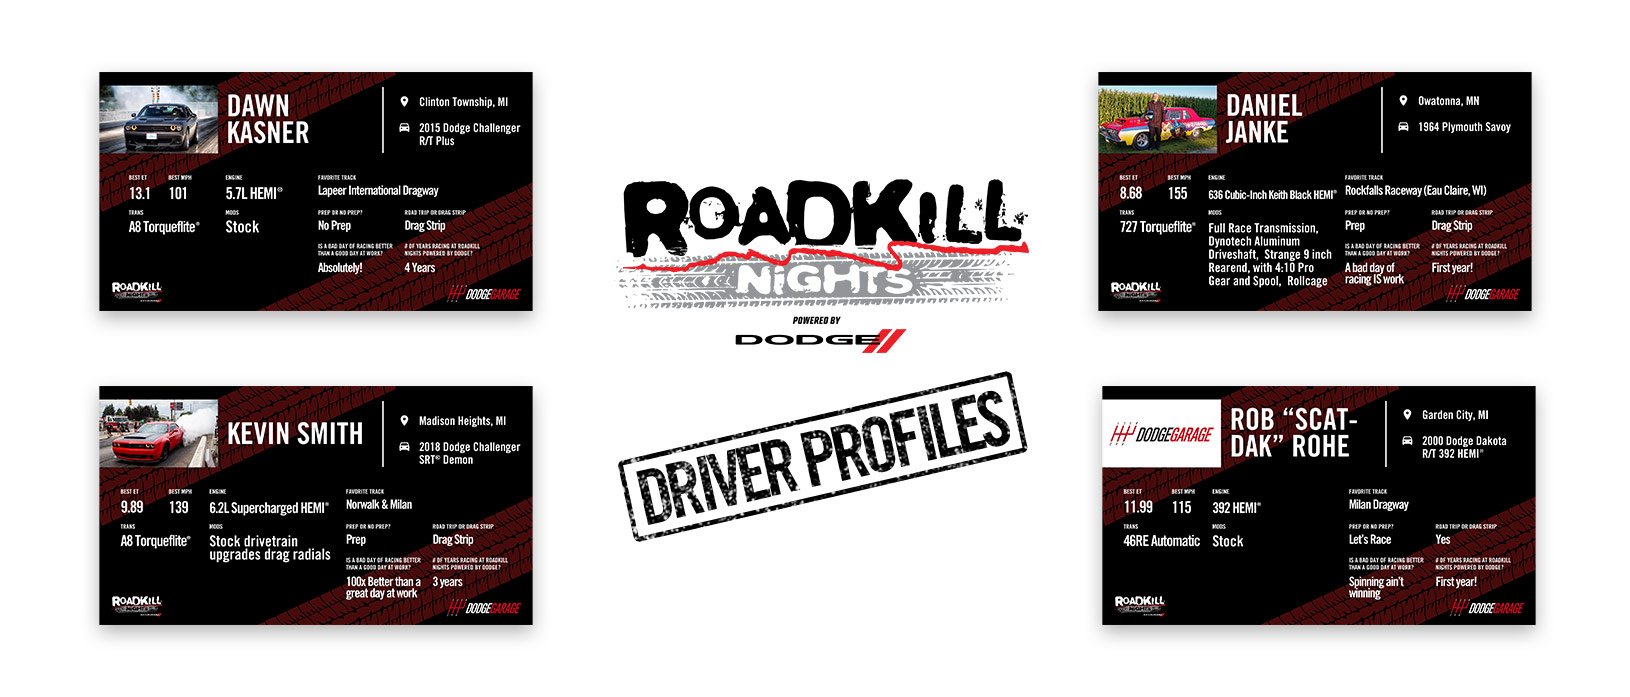 Meet Some of the Dodge Drag Racers Competing at Roadkill Nights